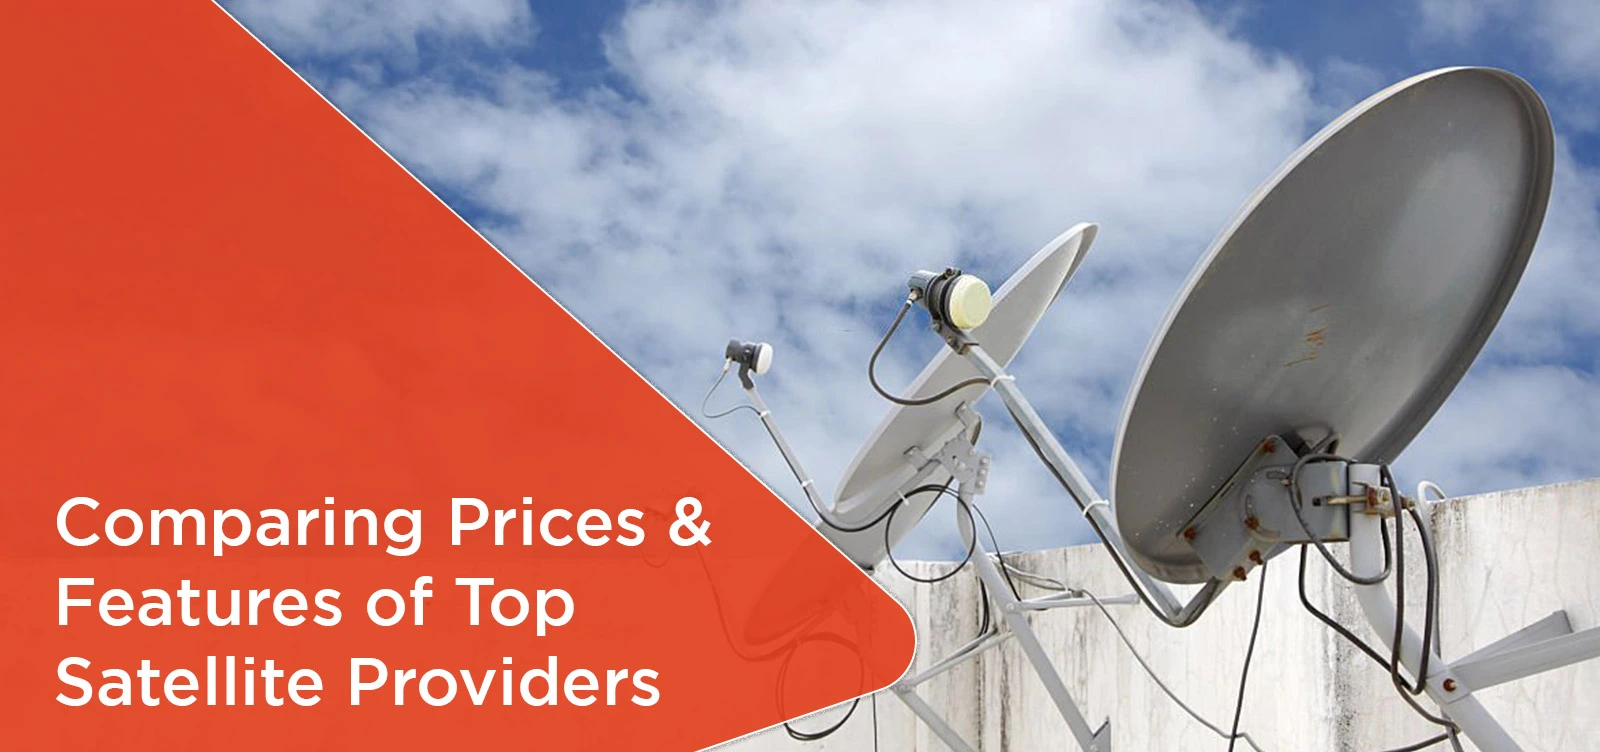 Comparing Prices & Features of Top Satellite Providers